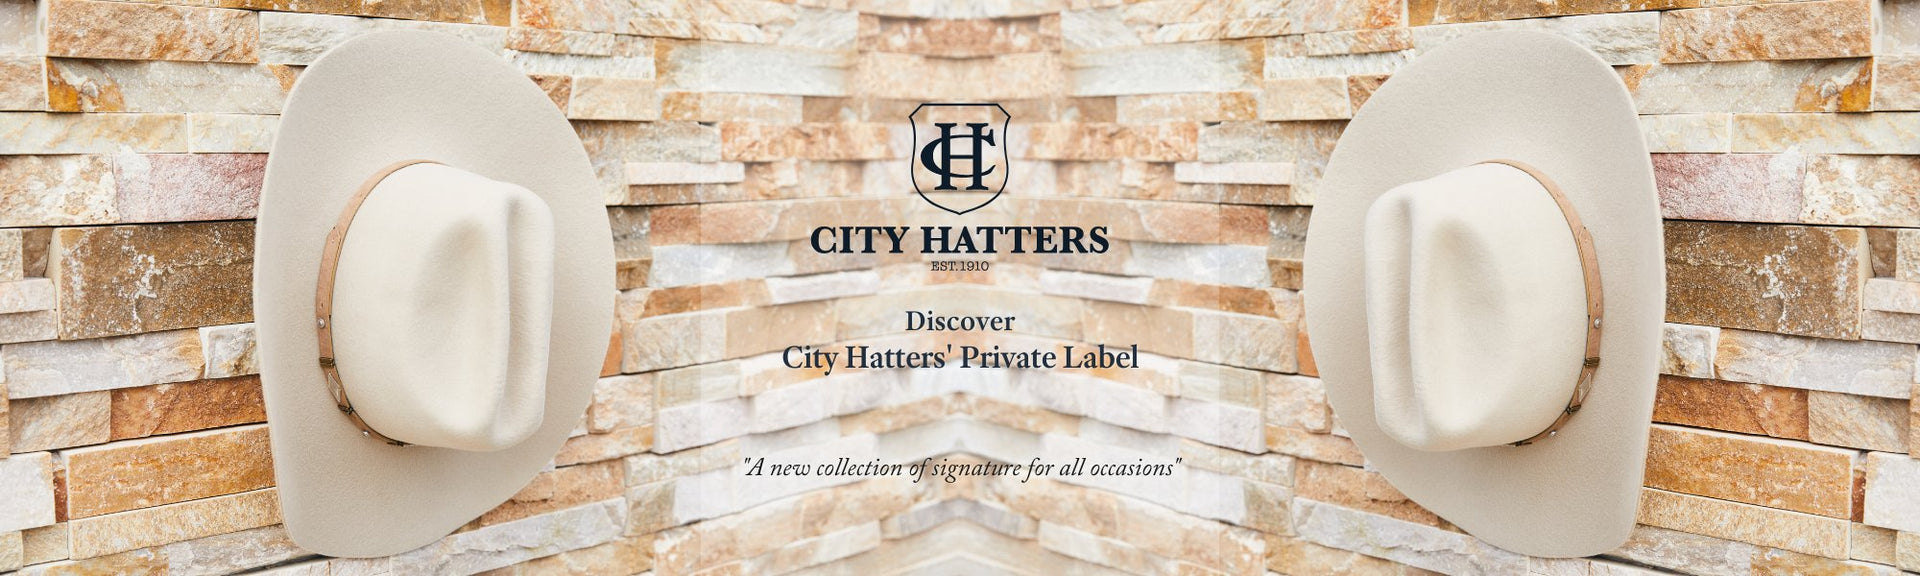 City Hatters